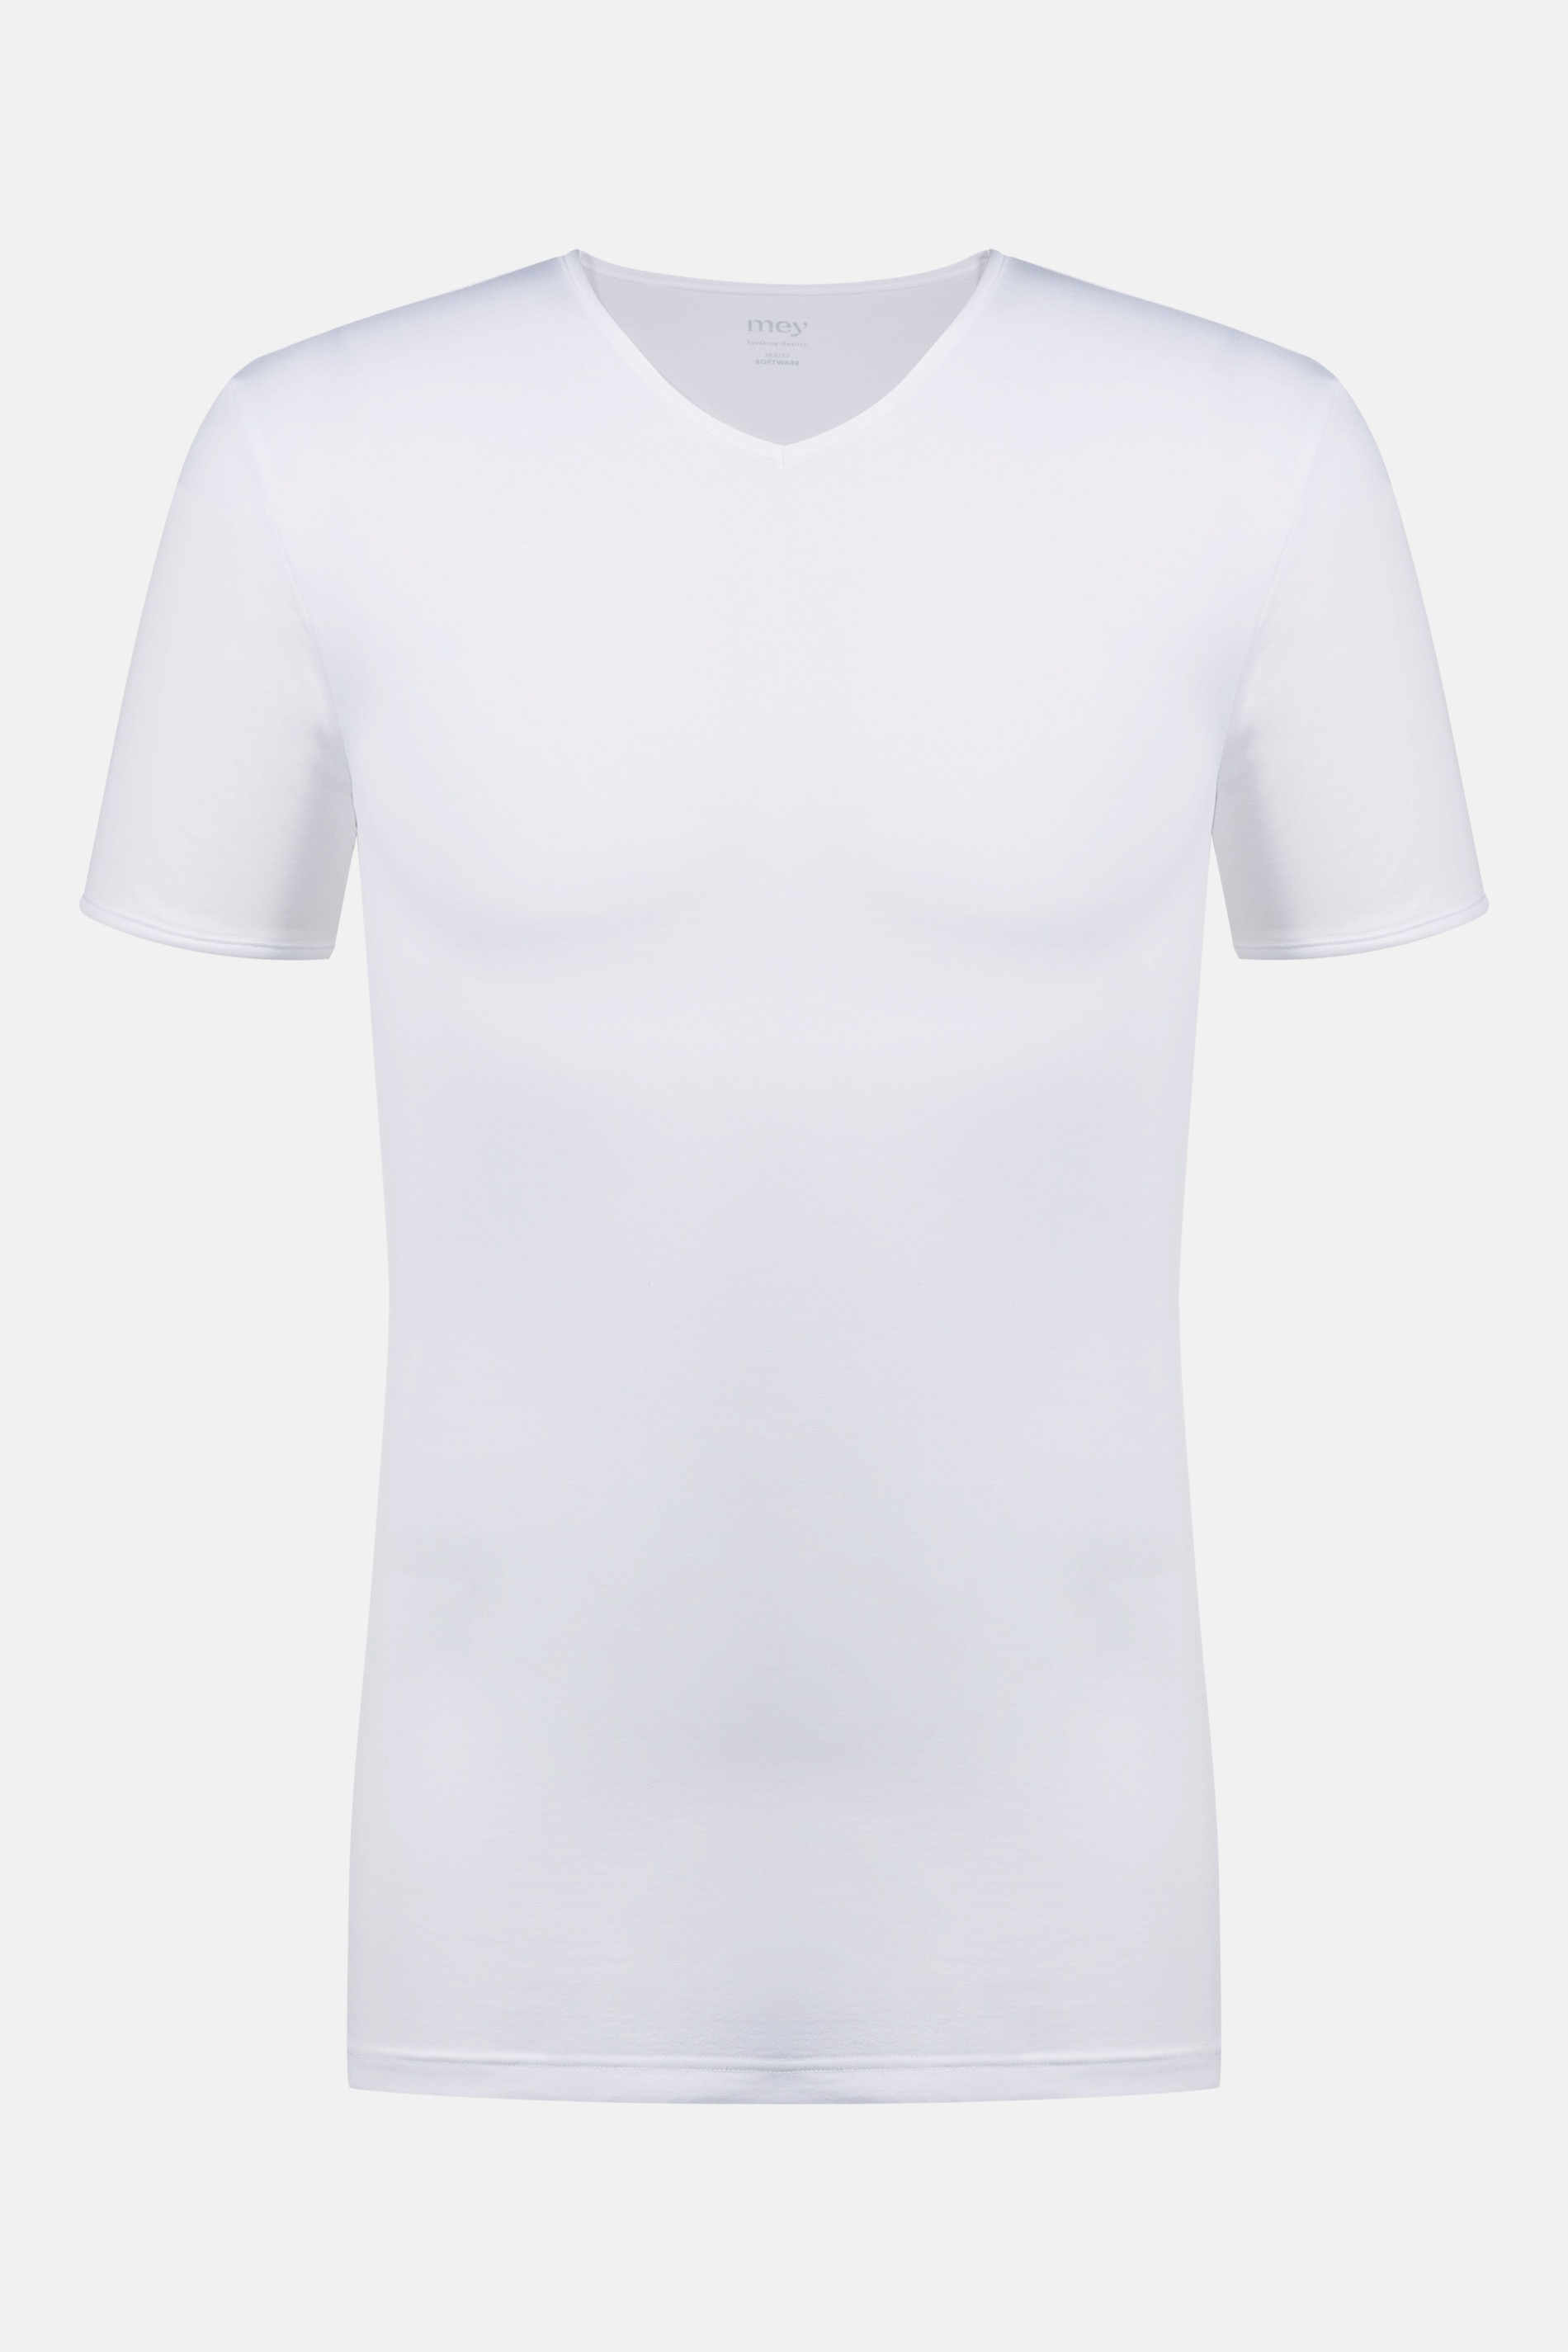 V-neck shirt White Serie Software Cut Out | mey®